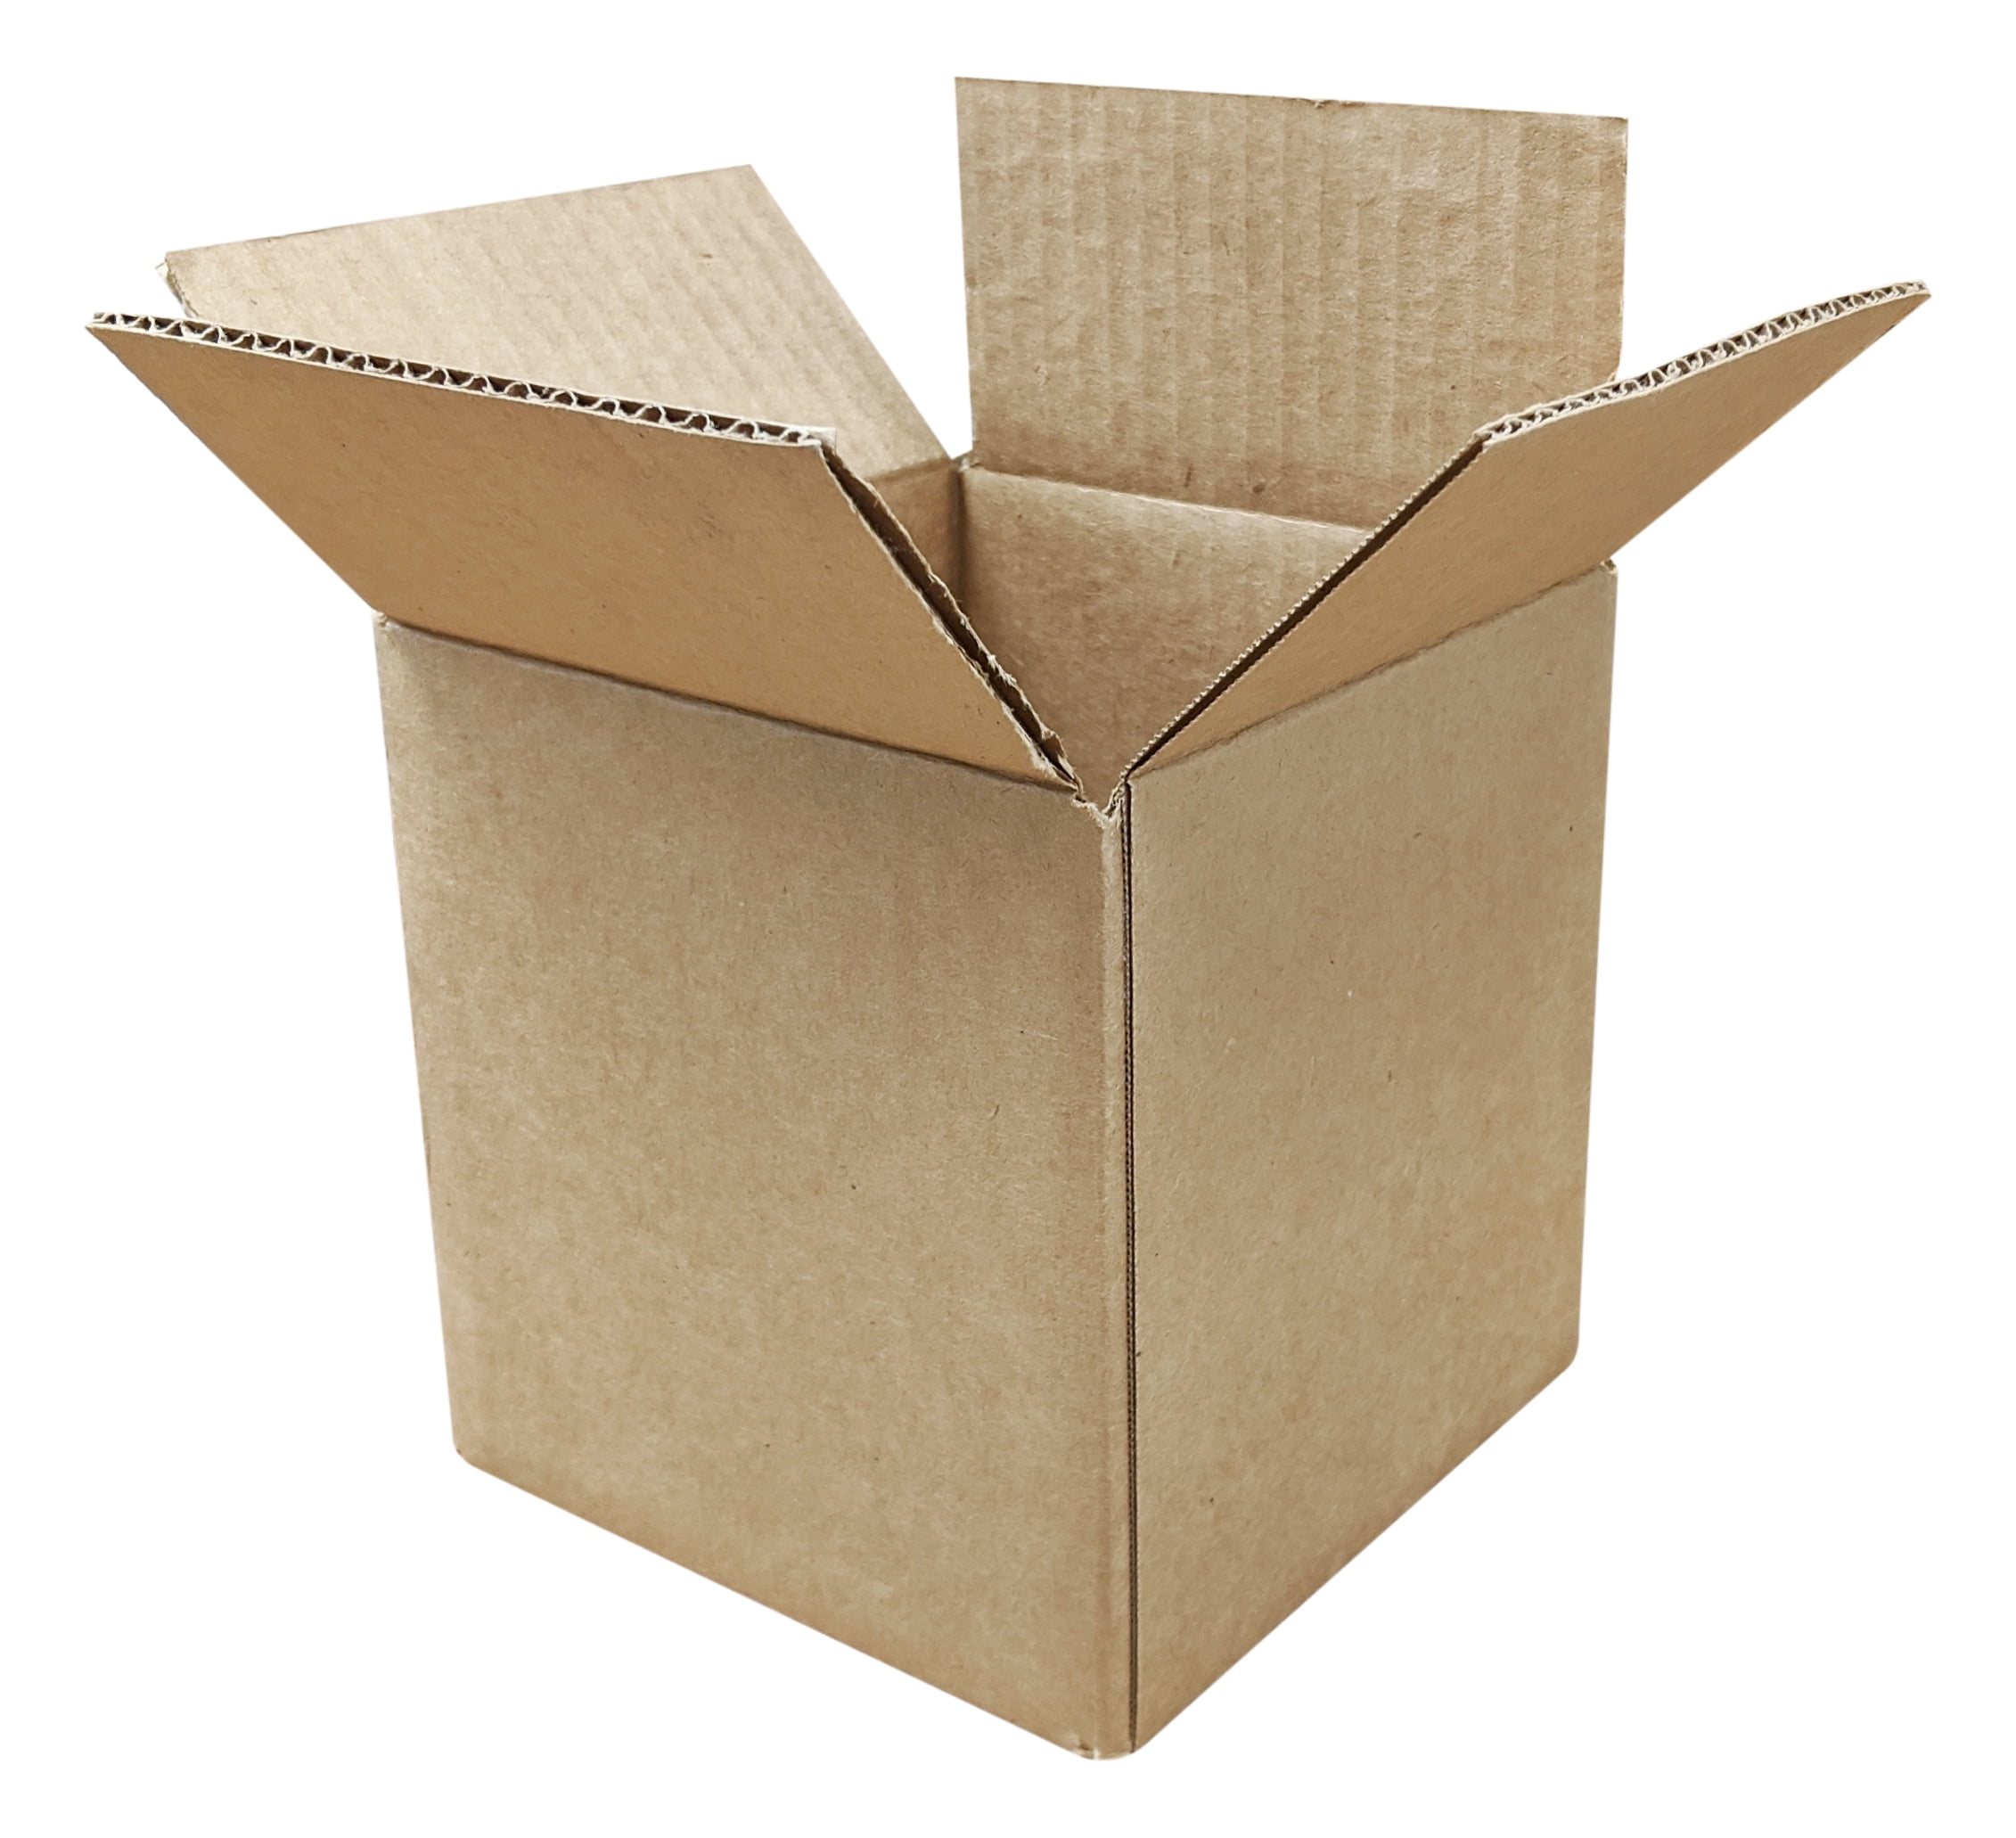 25x SMALL MAILING PACKING CARDBOARD BOXES 6x6x6" CUBE SINGLE WALL 